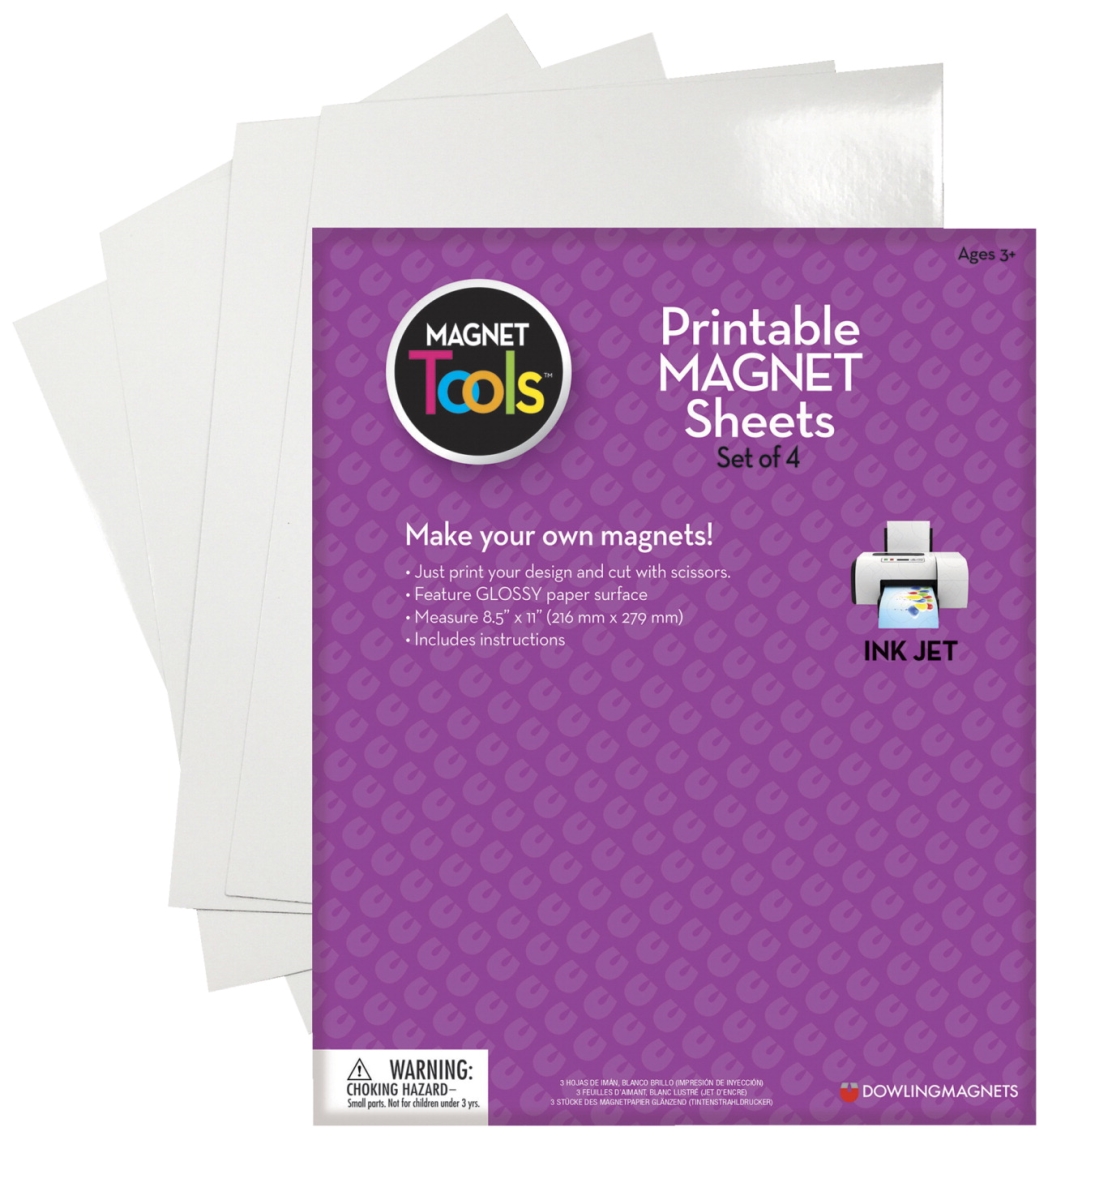 1596816 Printable Magnet Sheets, 8.5 X 11 In. - Set Of 4